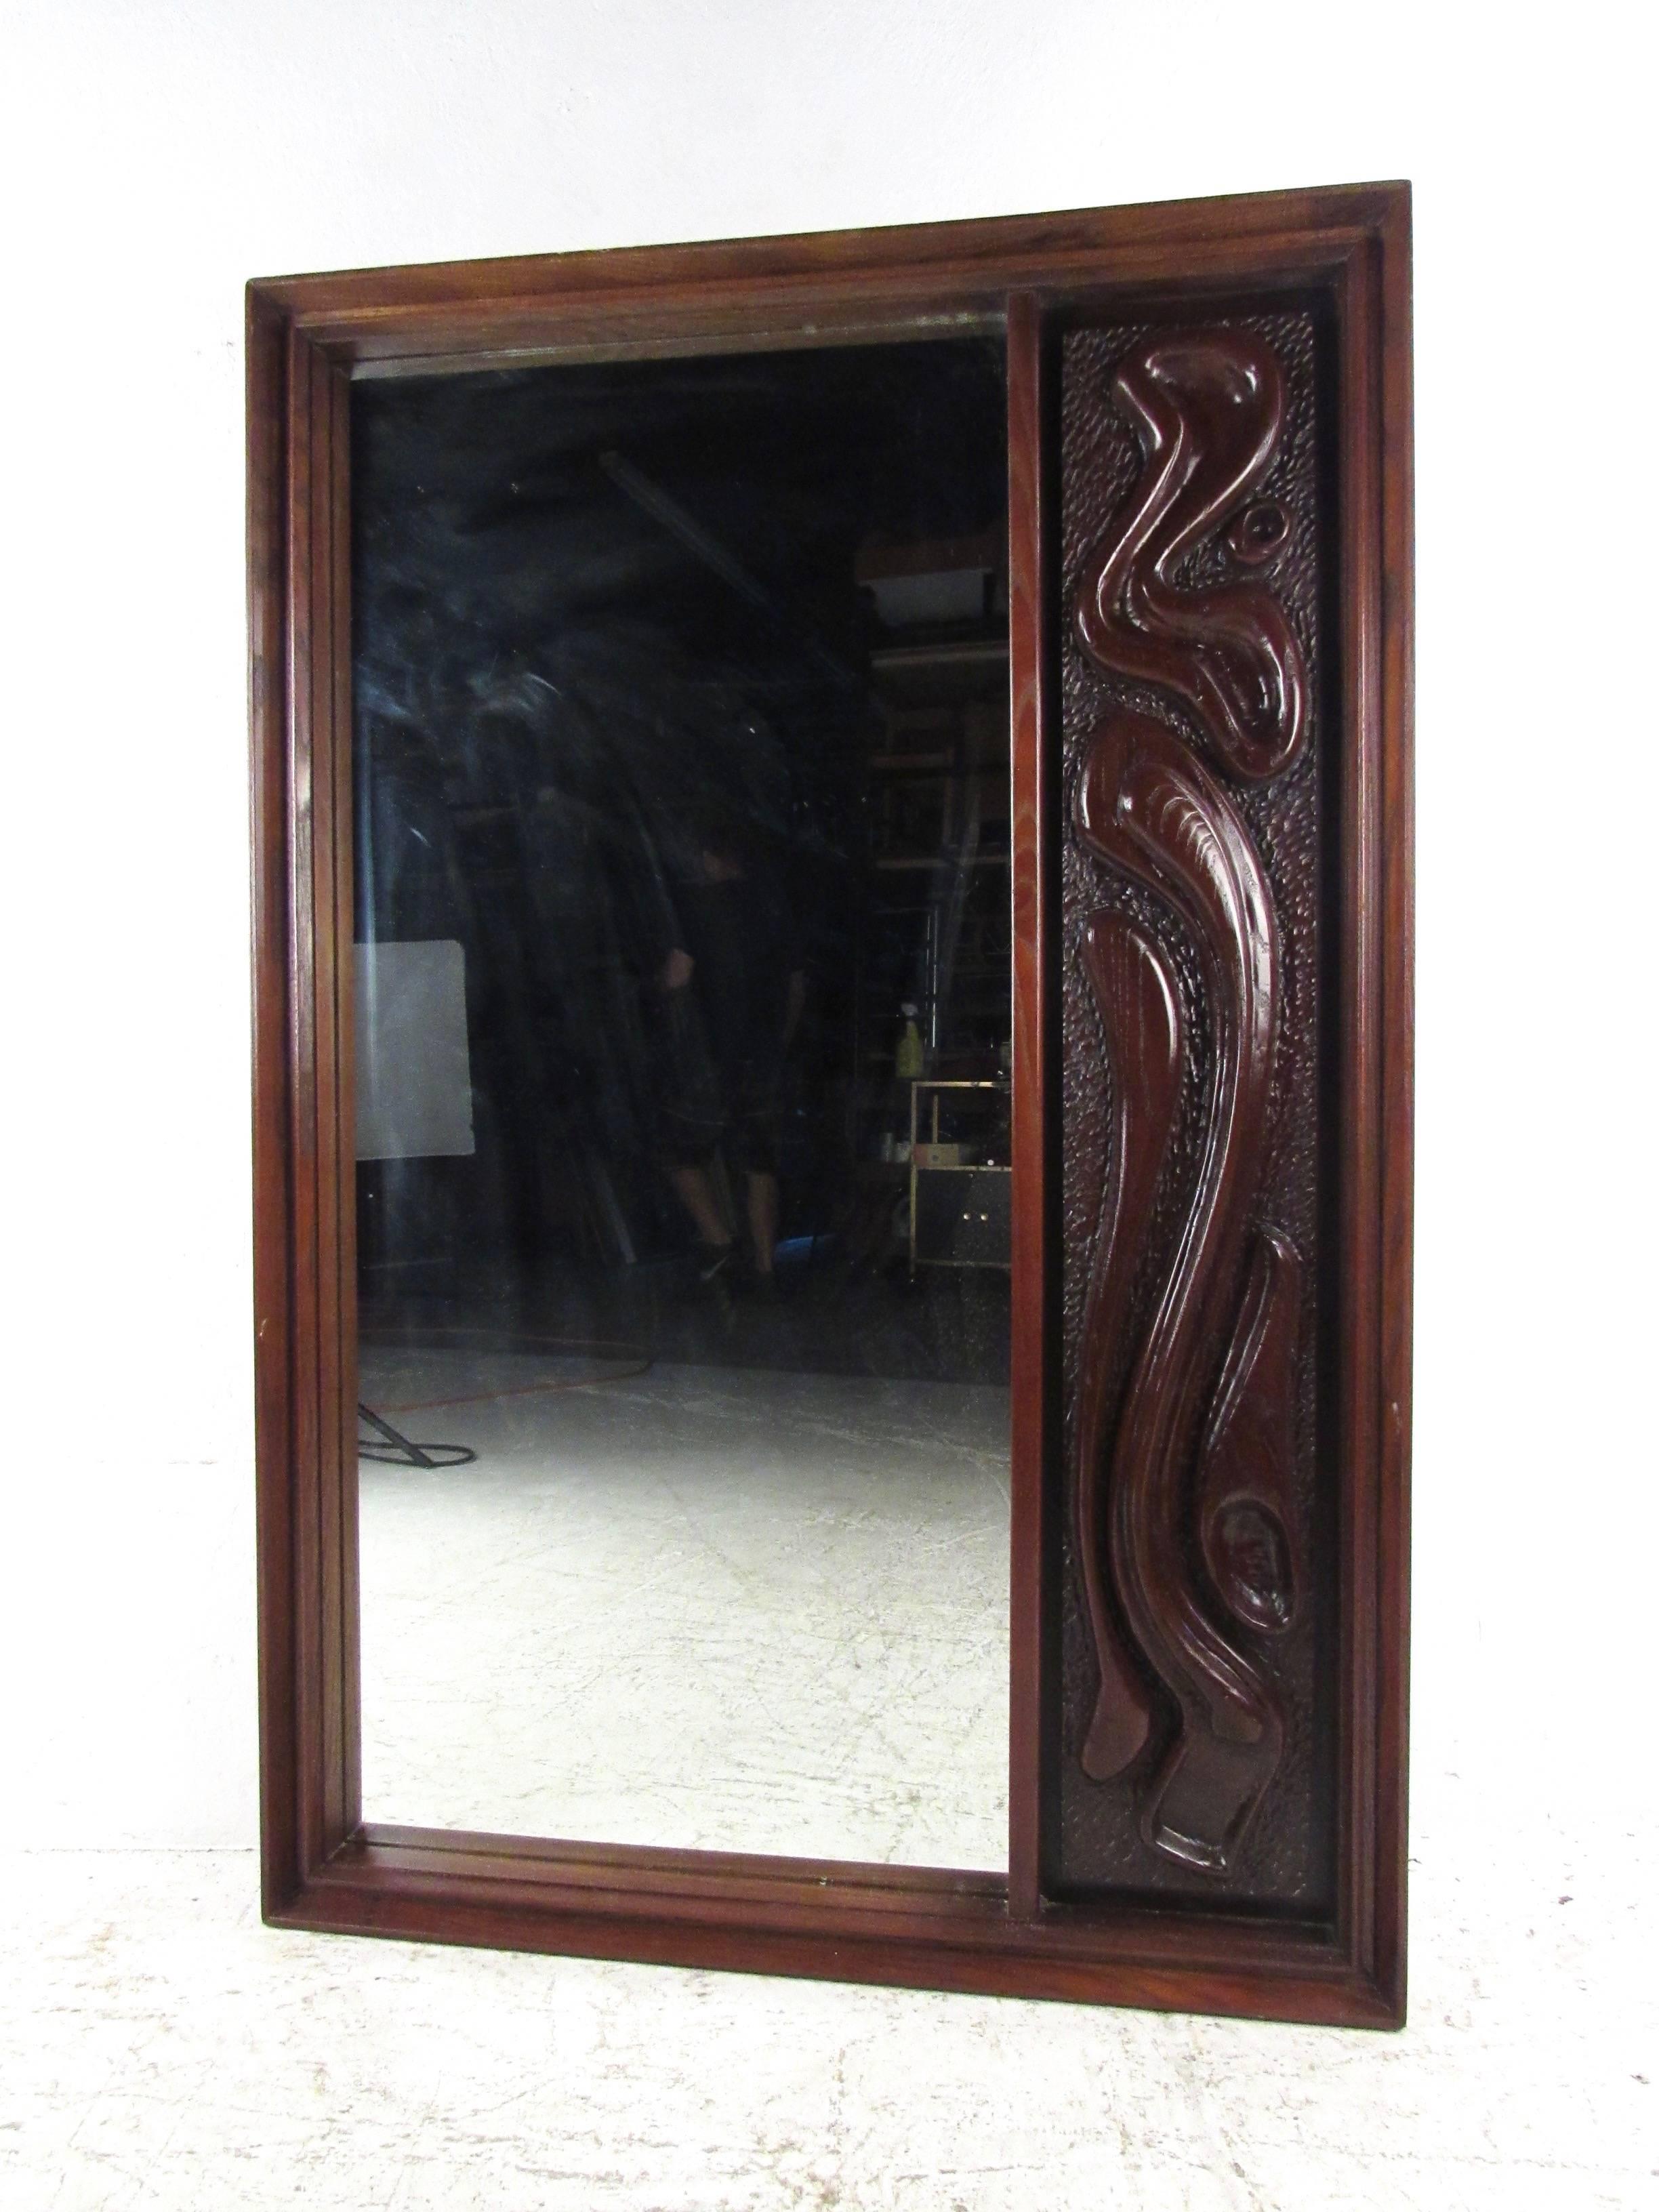 This large sculpted front mirror makes an impressive Brutalist addition to any bedroom or living space, in the manner of Witco Furniture. Please confirm item location (NY or NJ).